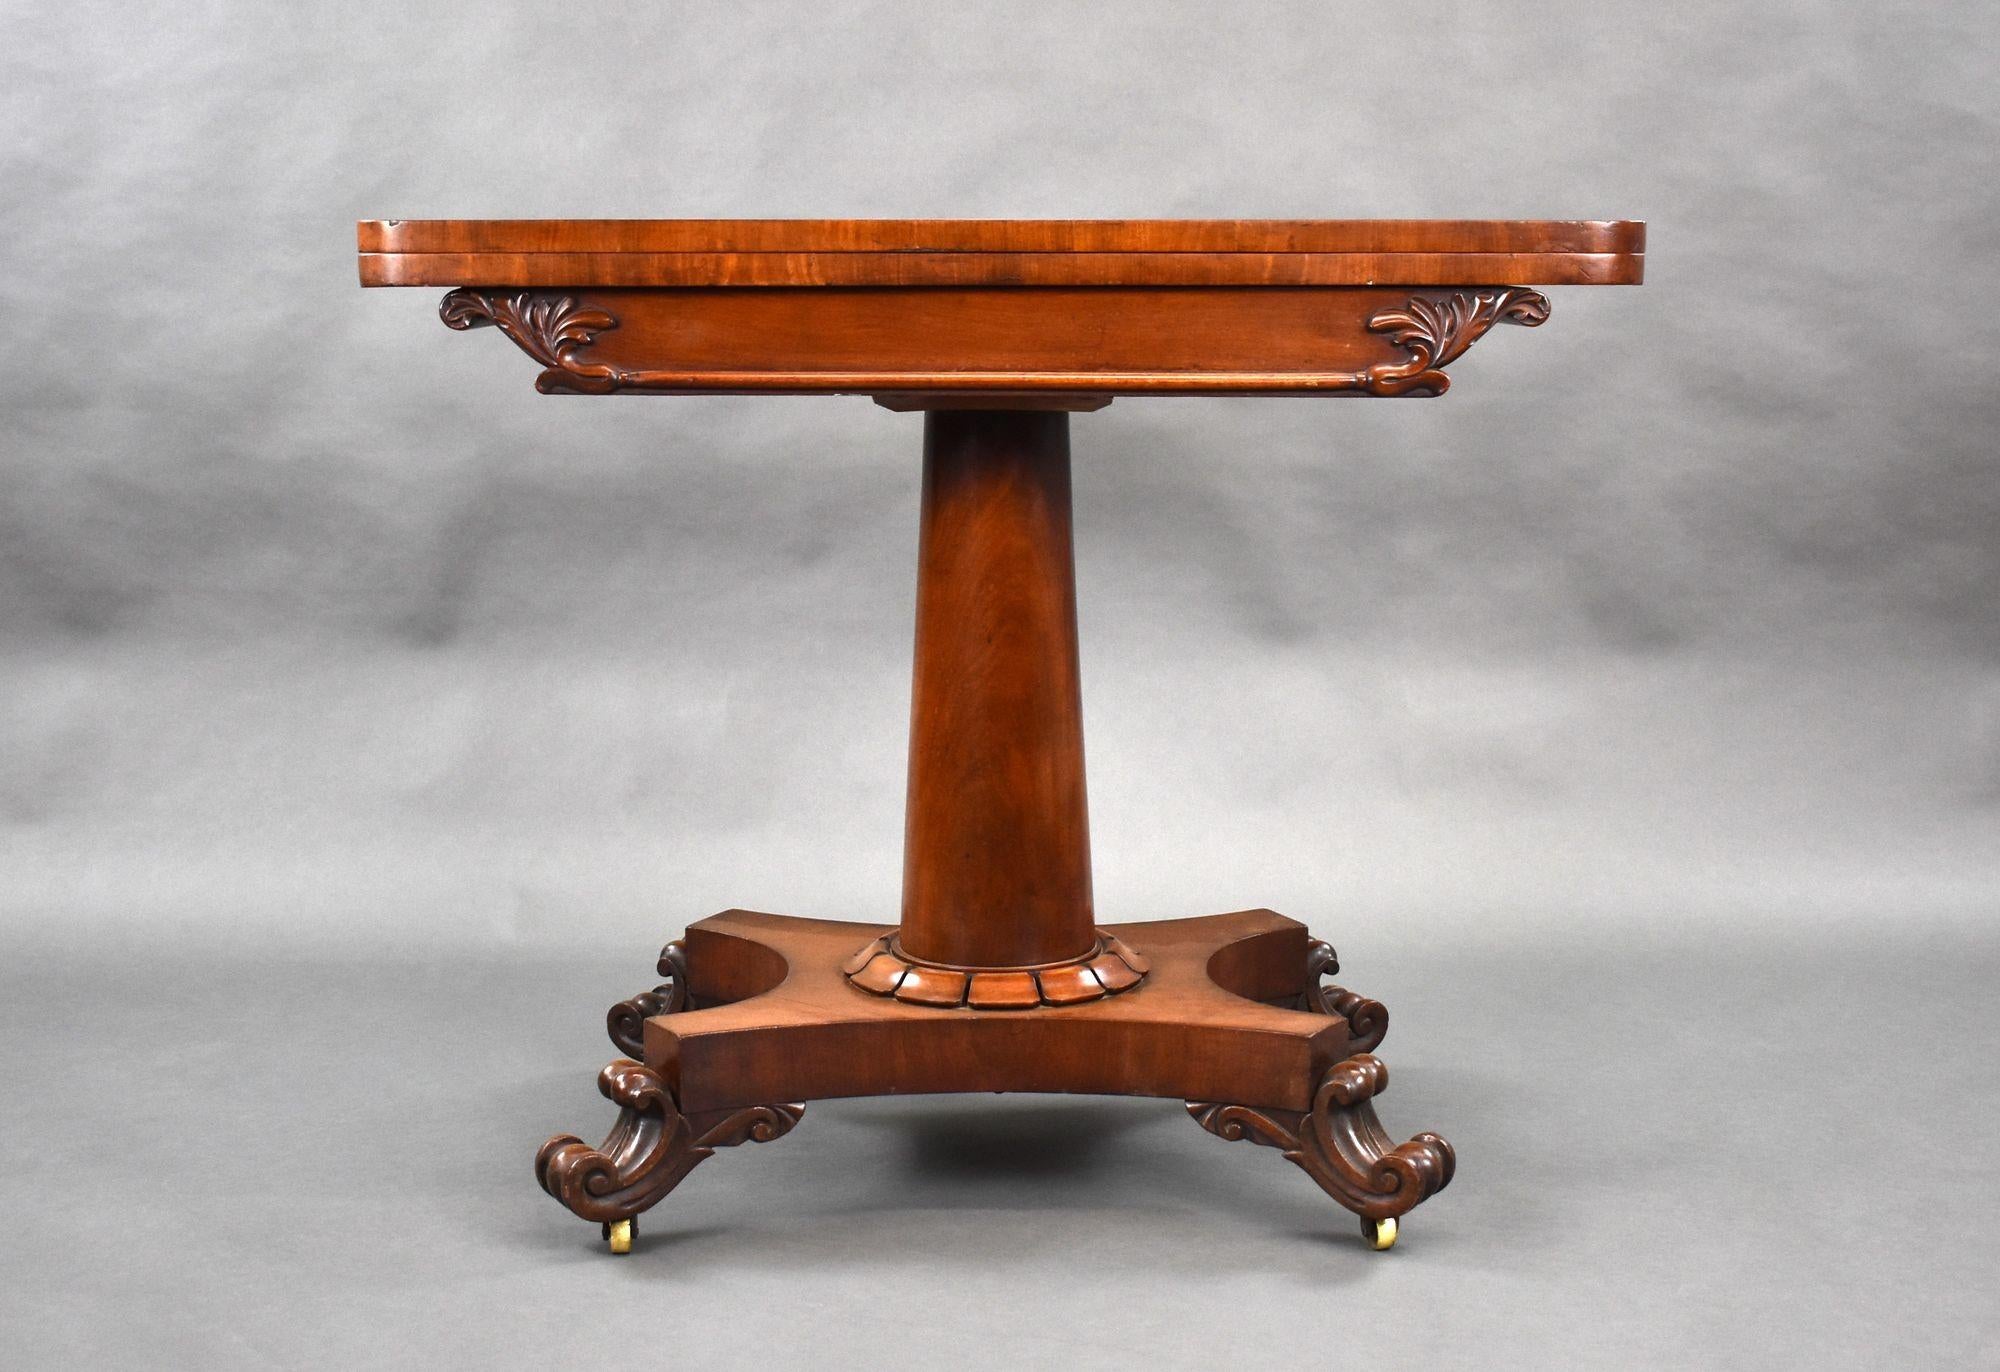 For sale is a good quality William IV mahogany card table, having a folder over top above a cylindrical stem, the table has a platform base raised on four elegant scroll feet. This piece remains in very good condition for its age.
Width: 91cm Depth: